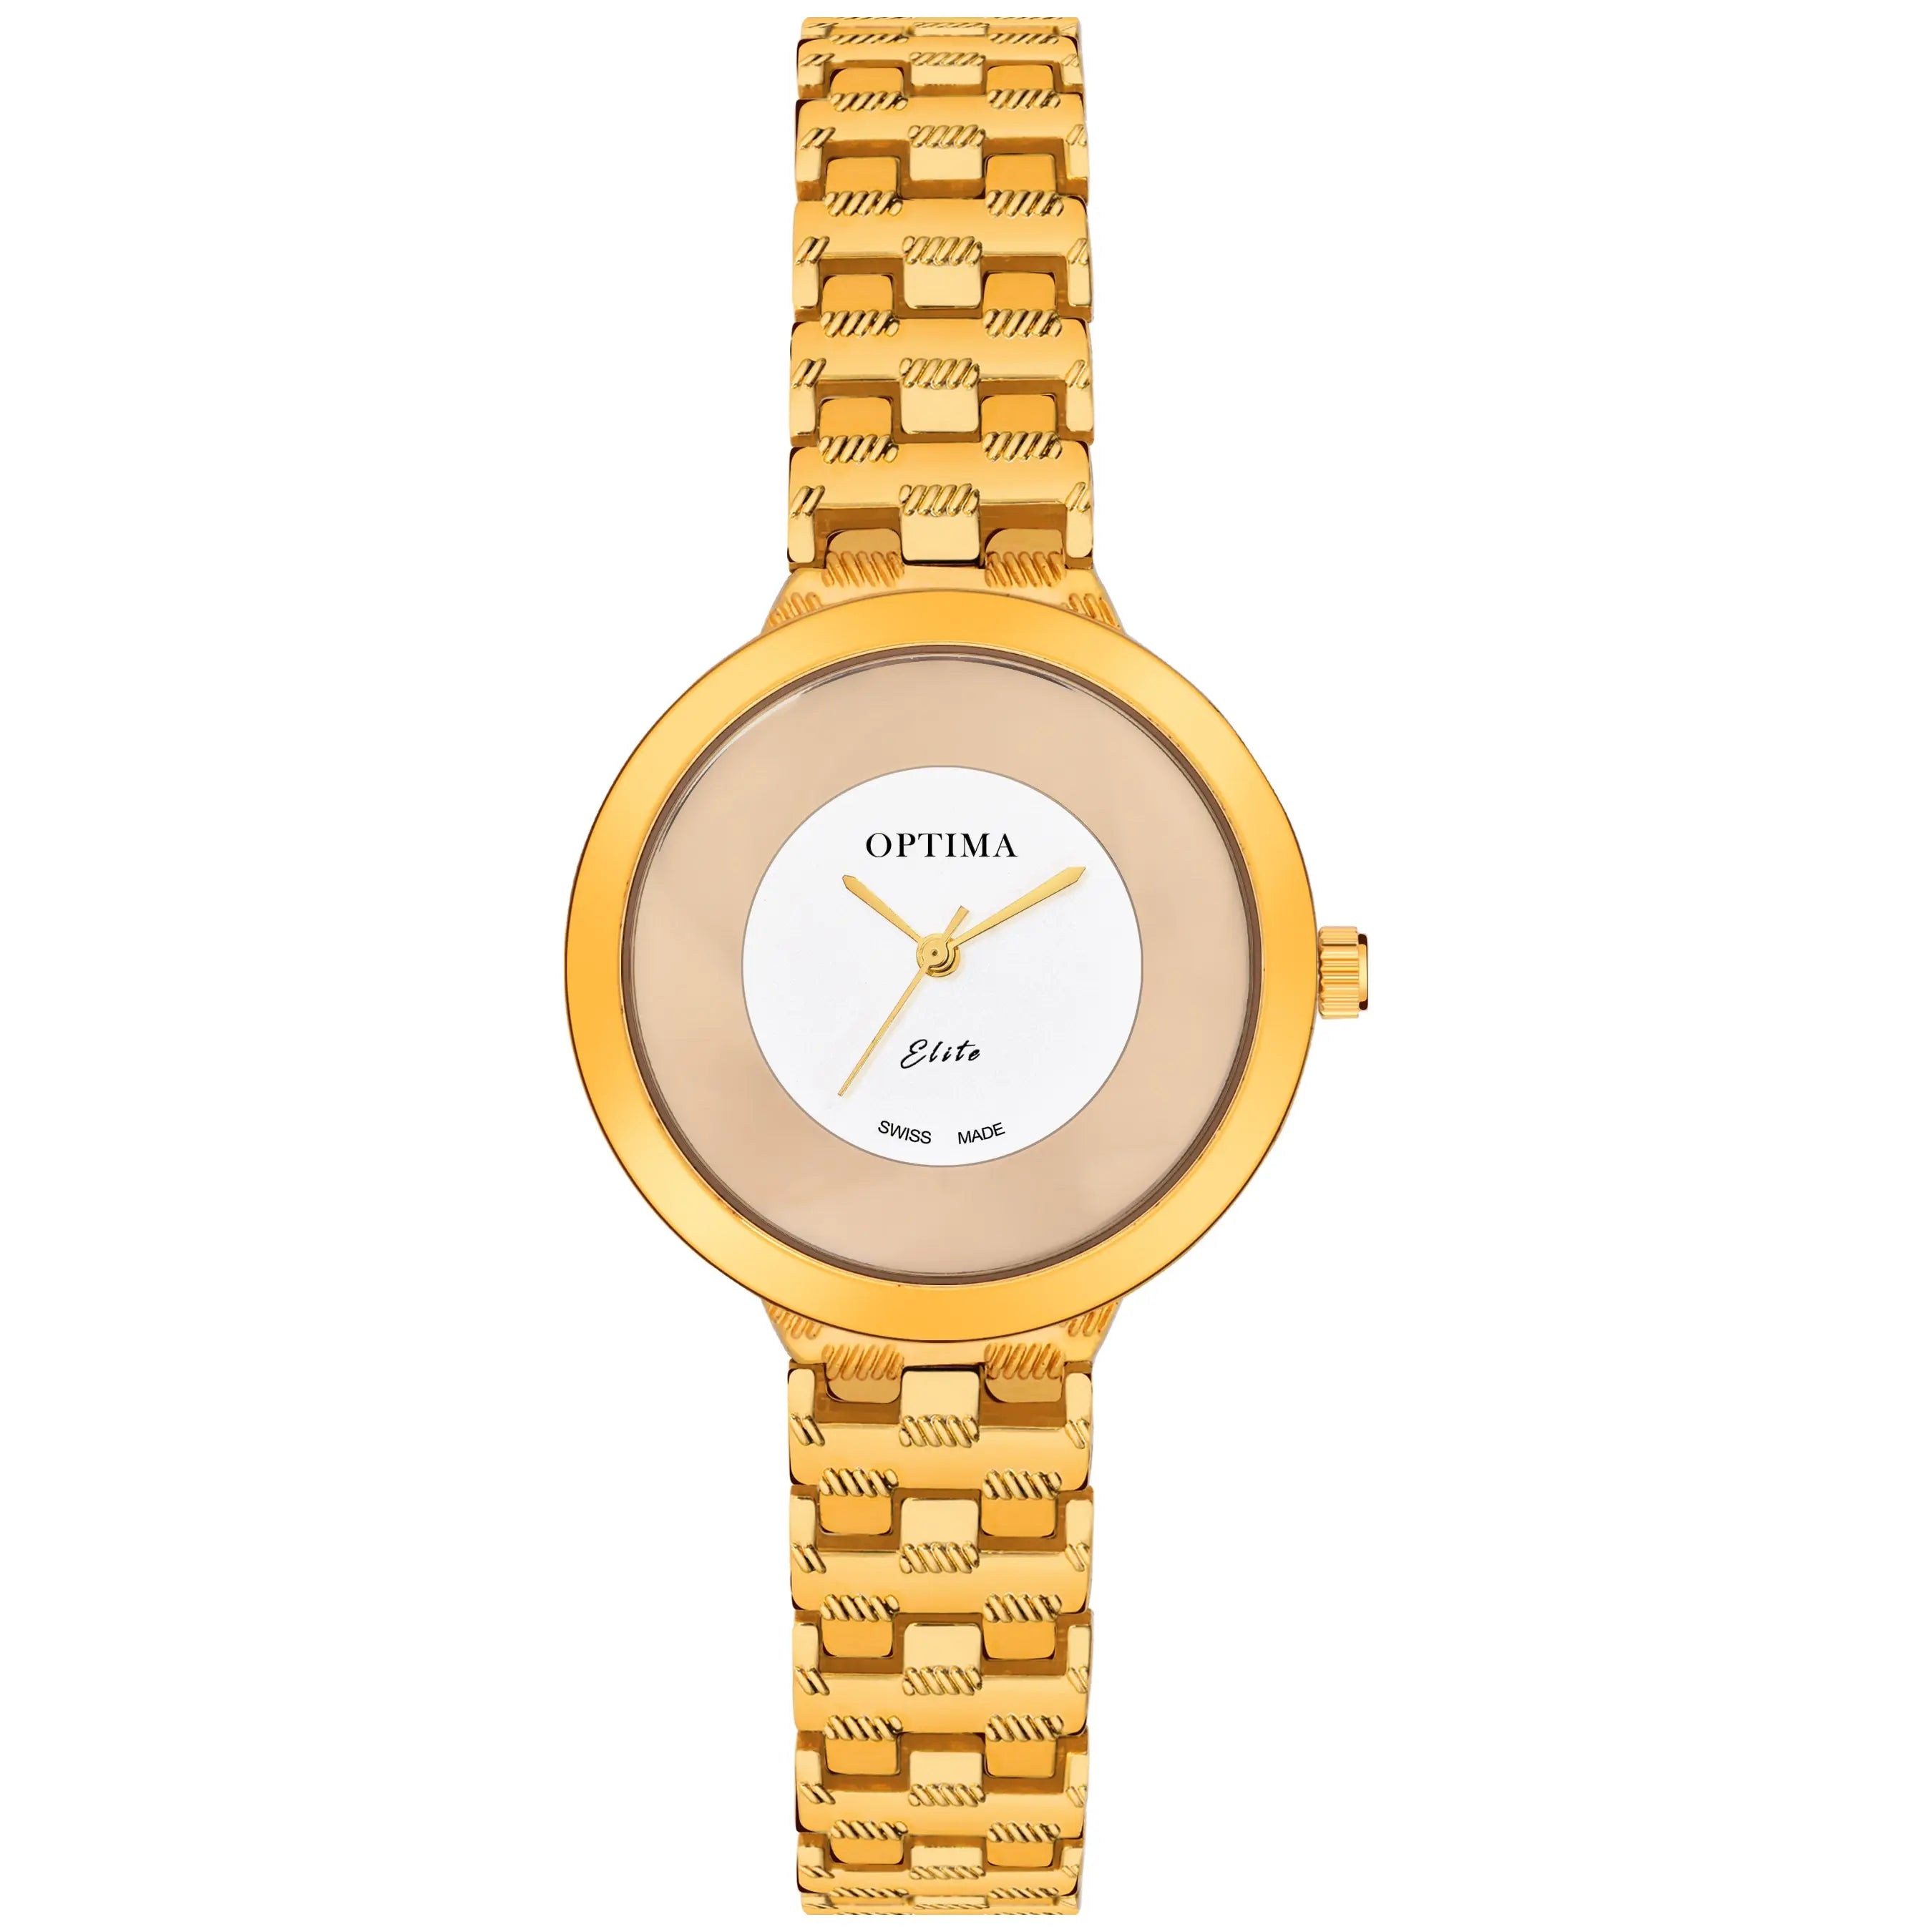 Buy Optima Day & Date Featured Gold Plated Quartz Analog Watch - for Men  (Gold) at Amazon.in